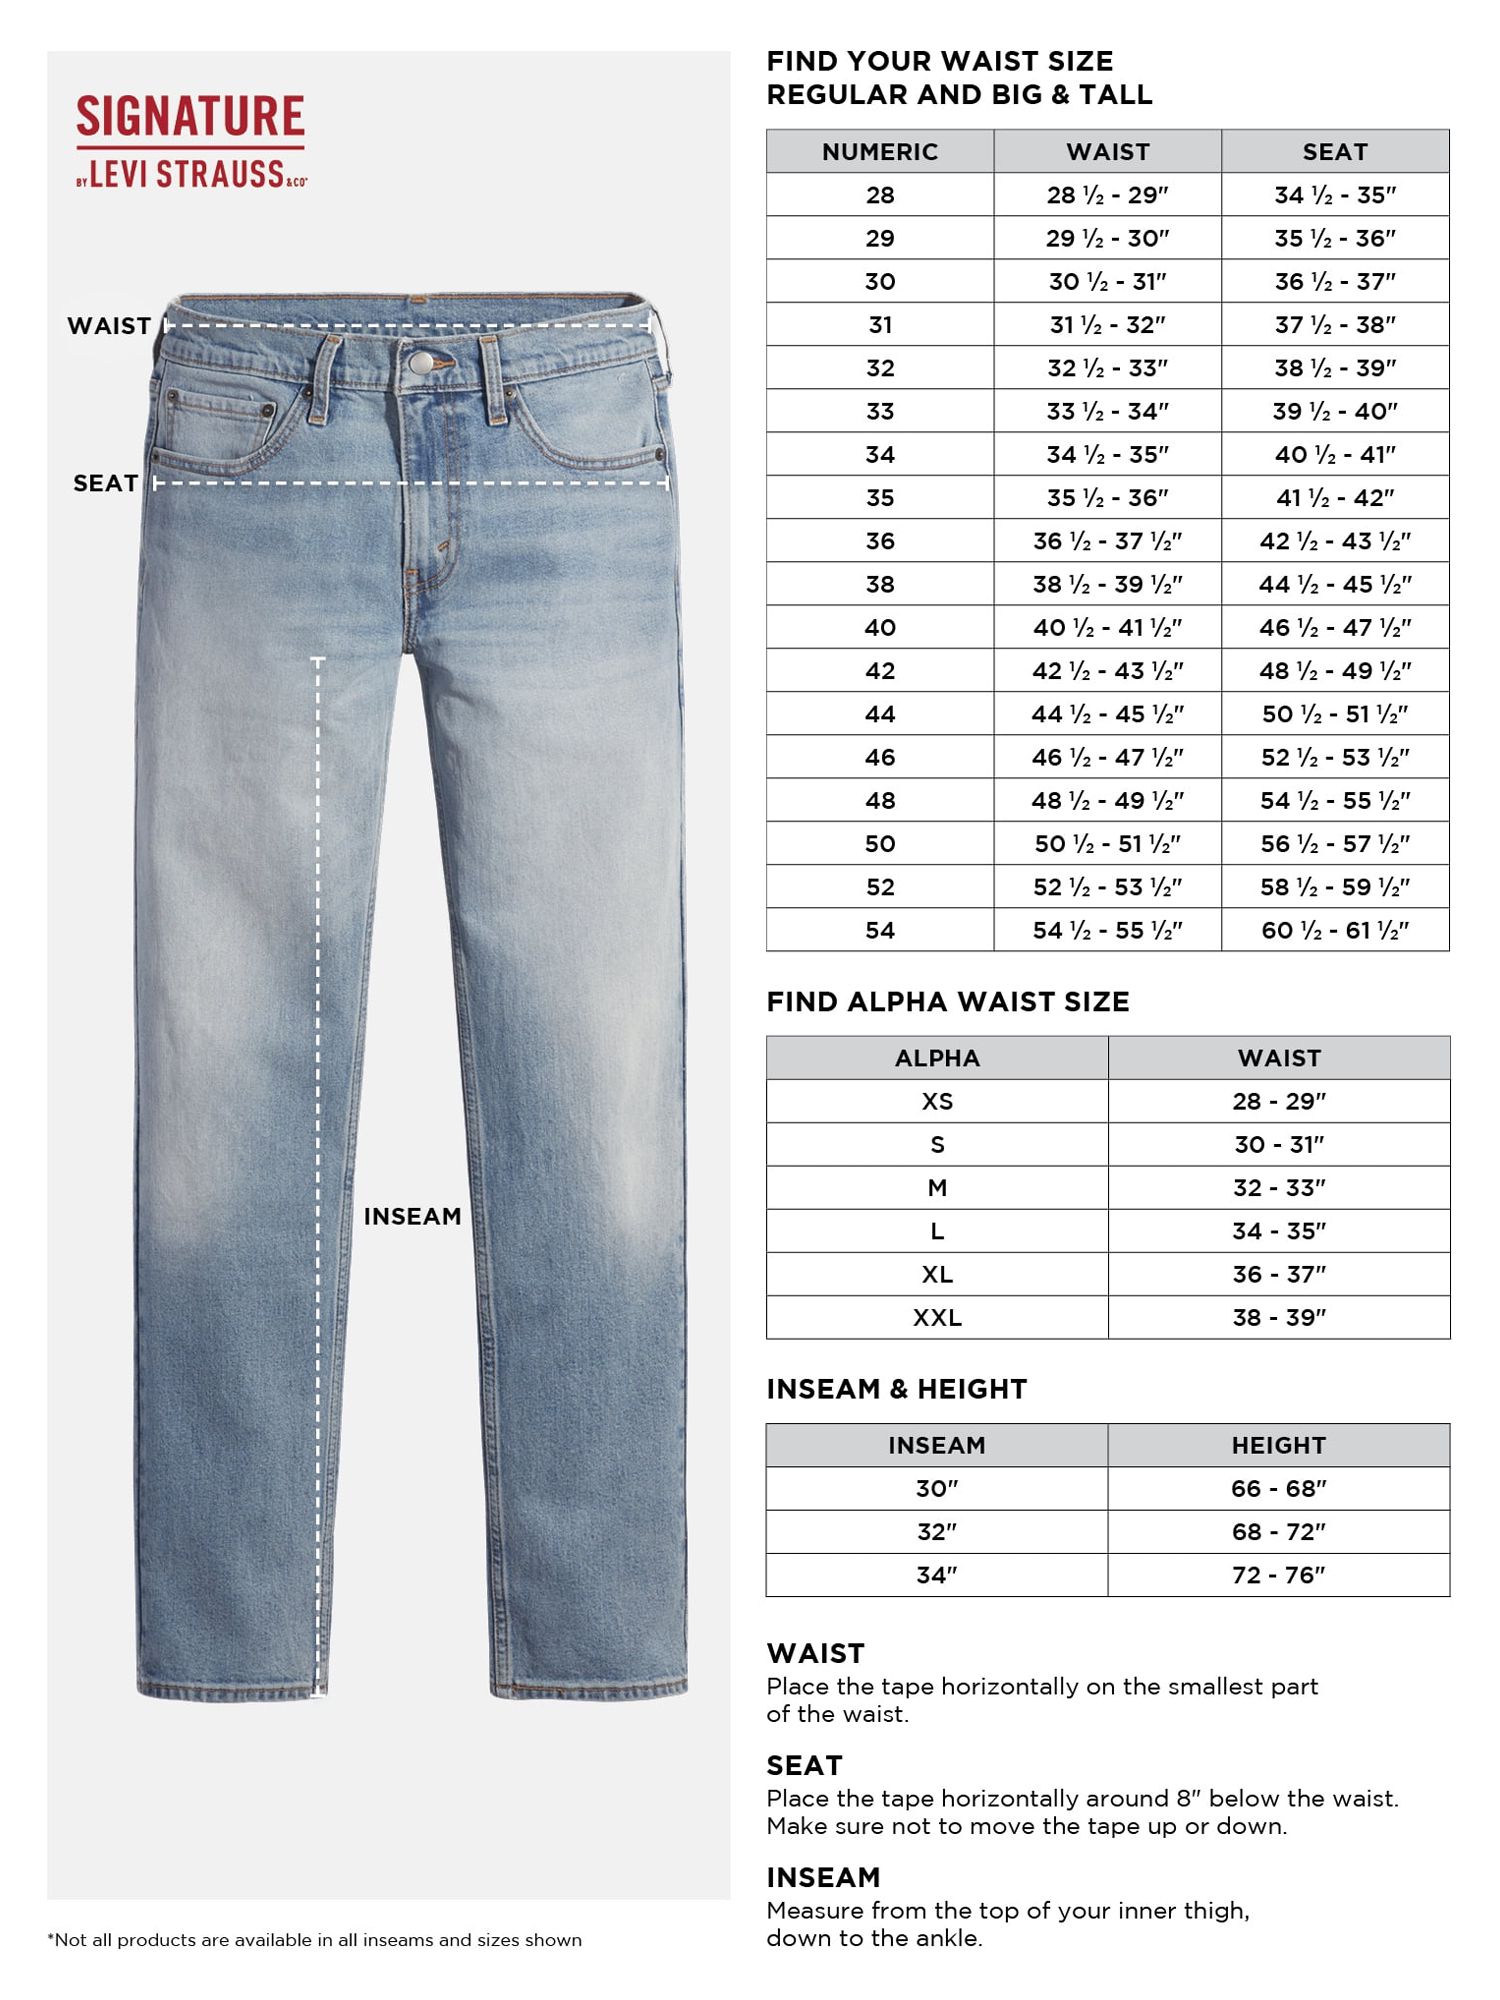 Signature by Levi Strauss & Co. Men's Stylized Regular Taper Fit Jeans - image 5 of 5